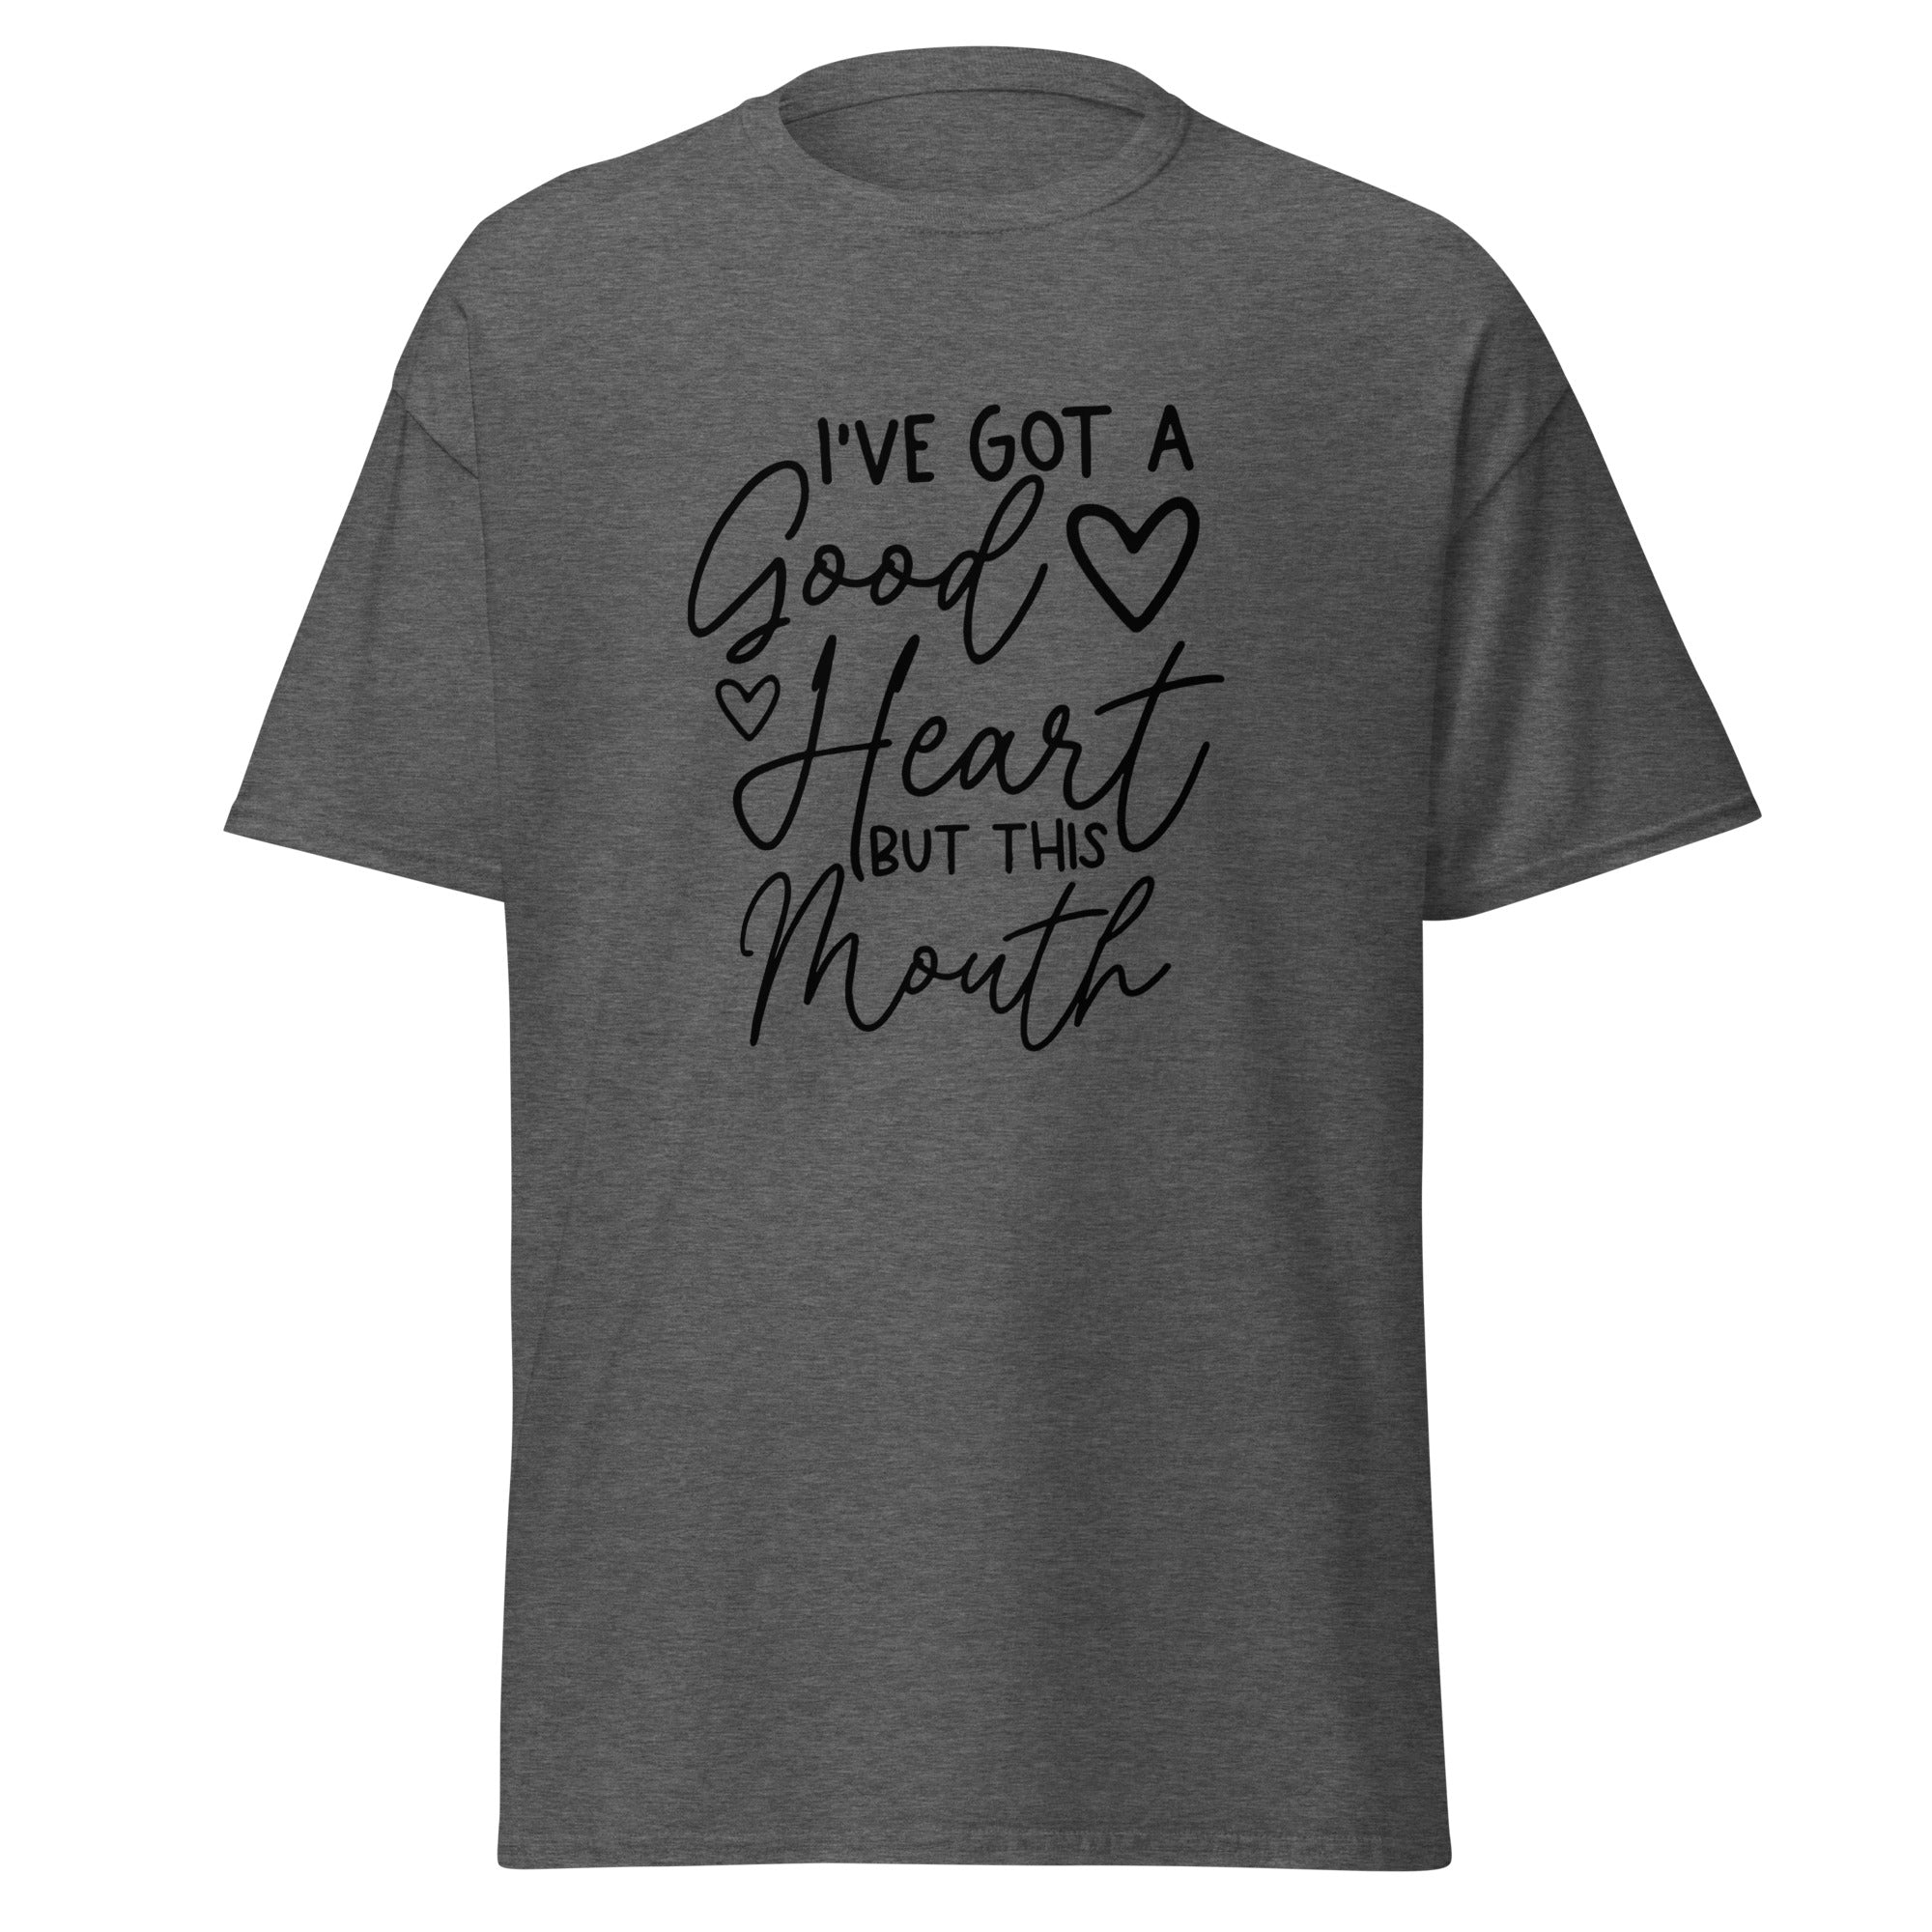 I've Got a Good Heart But This Mouth Unisex Classic Tee